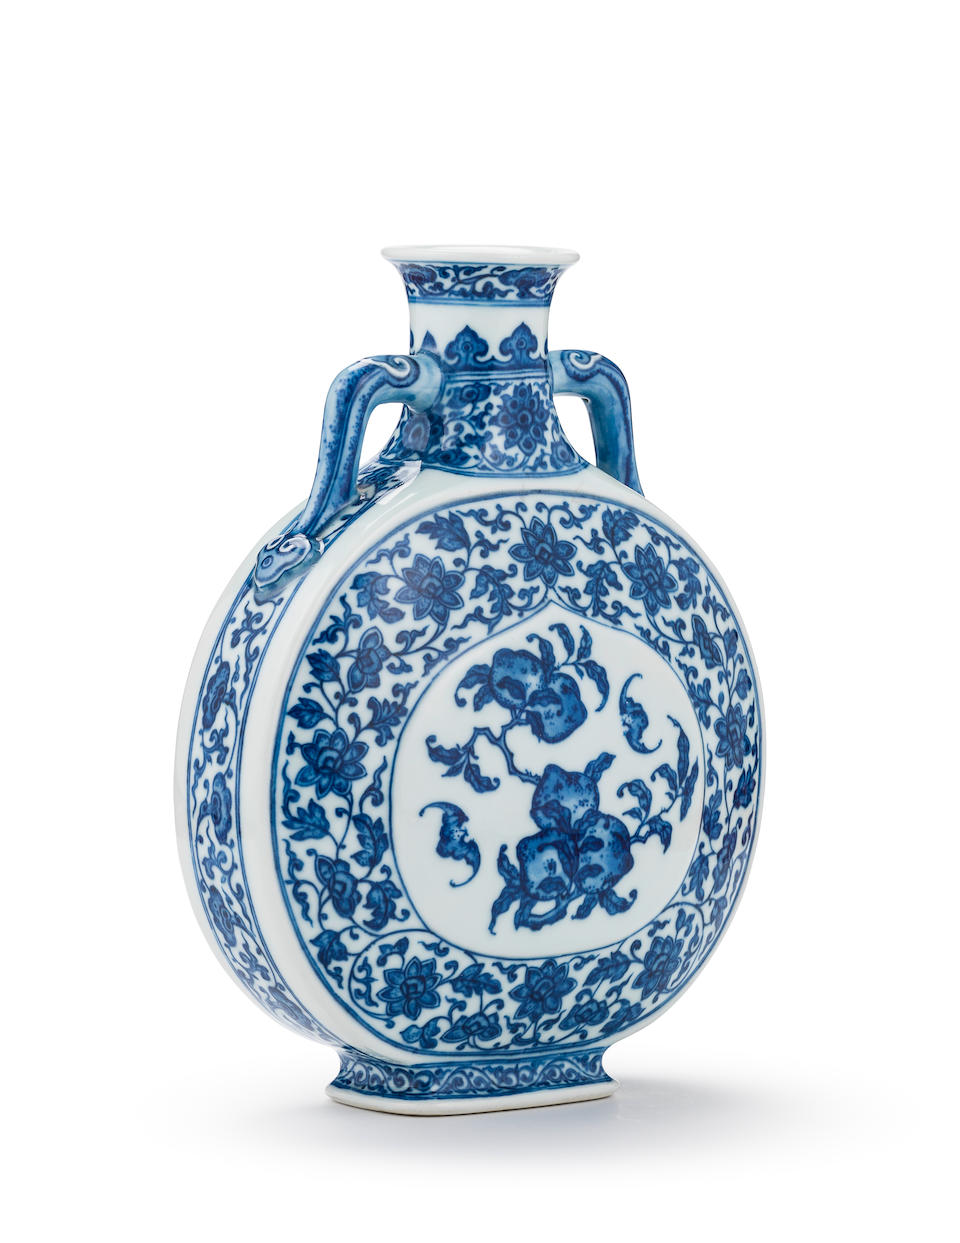 A rare Imperial Ming-style blue and white 'peach' pilgrim flask, bianhu Daoguang seal mark and of the period